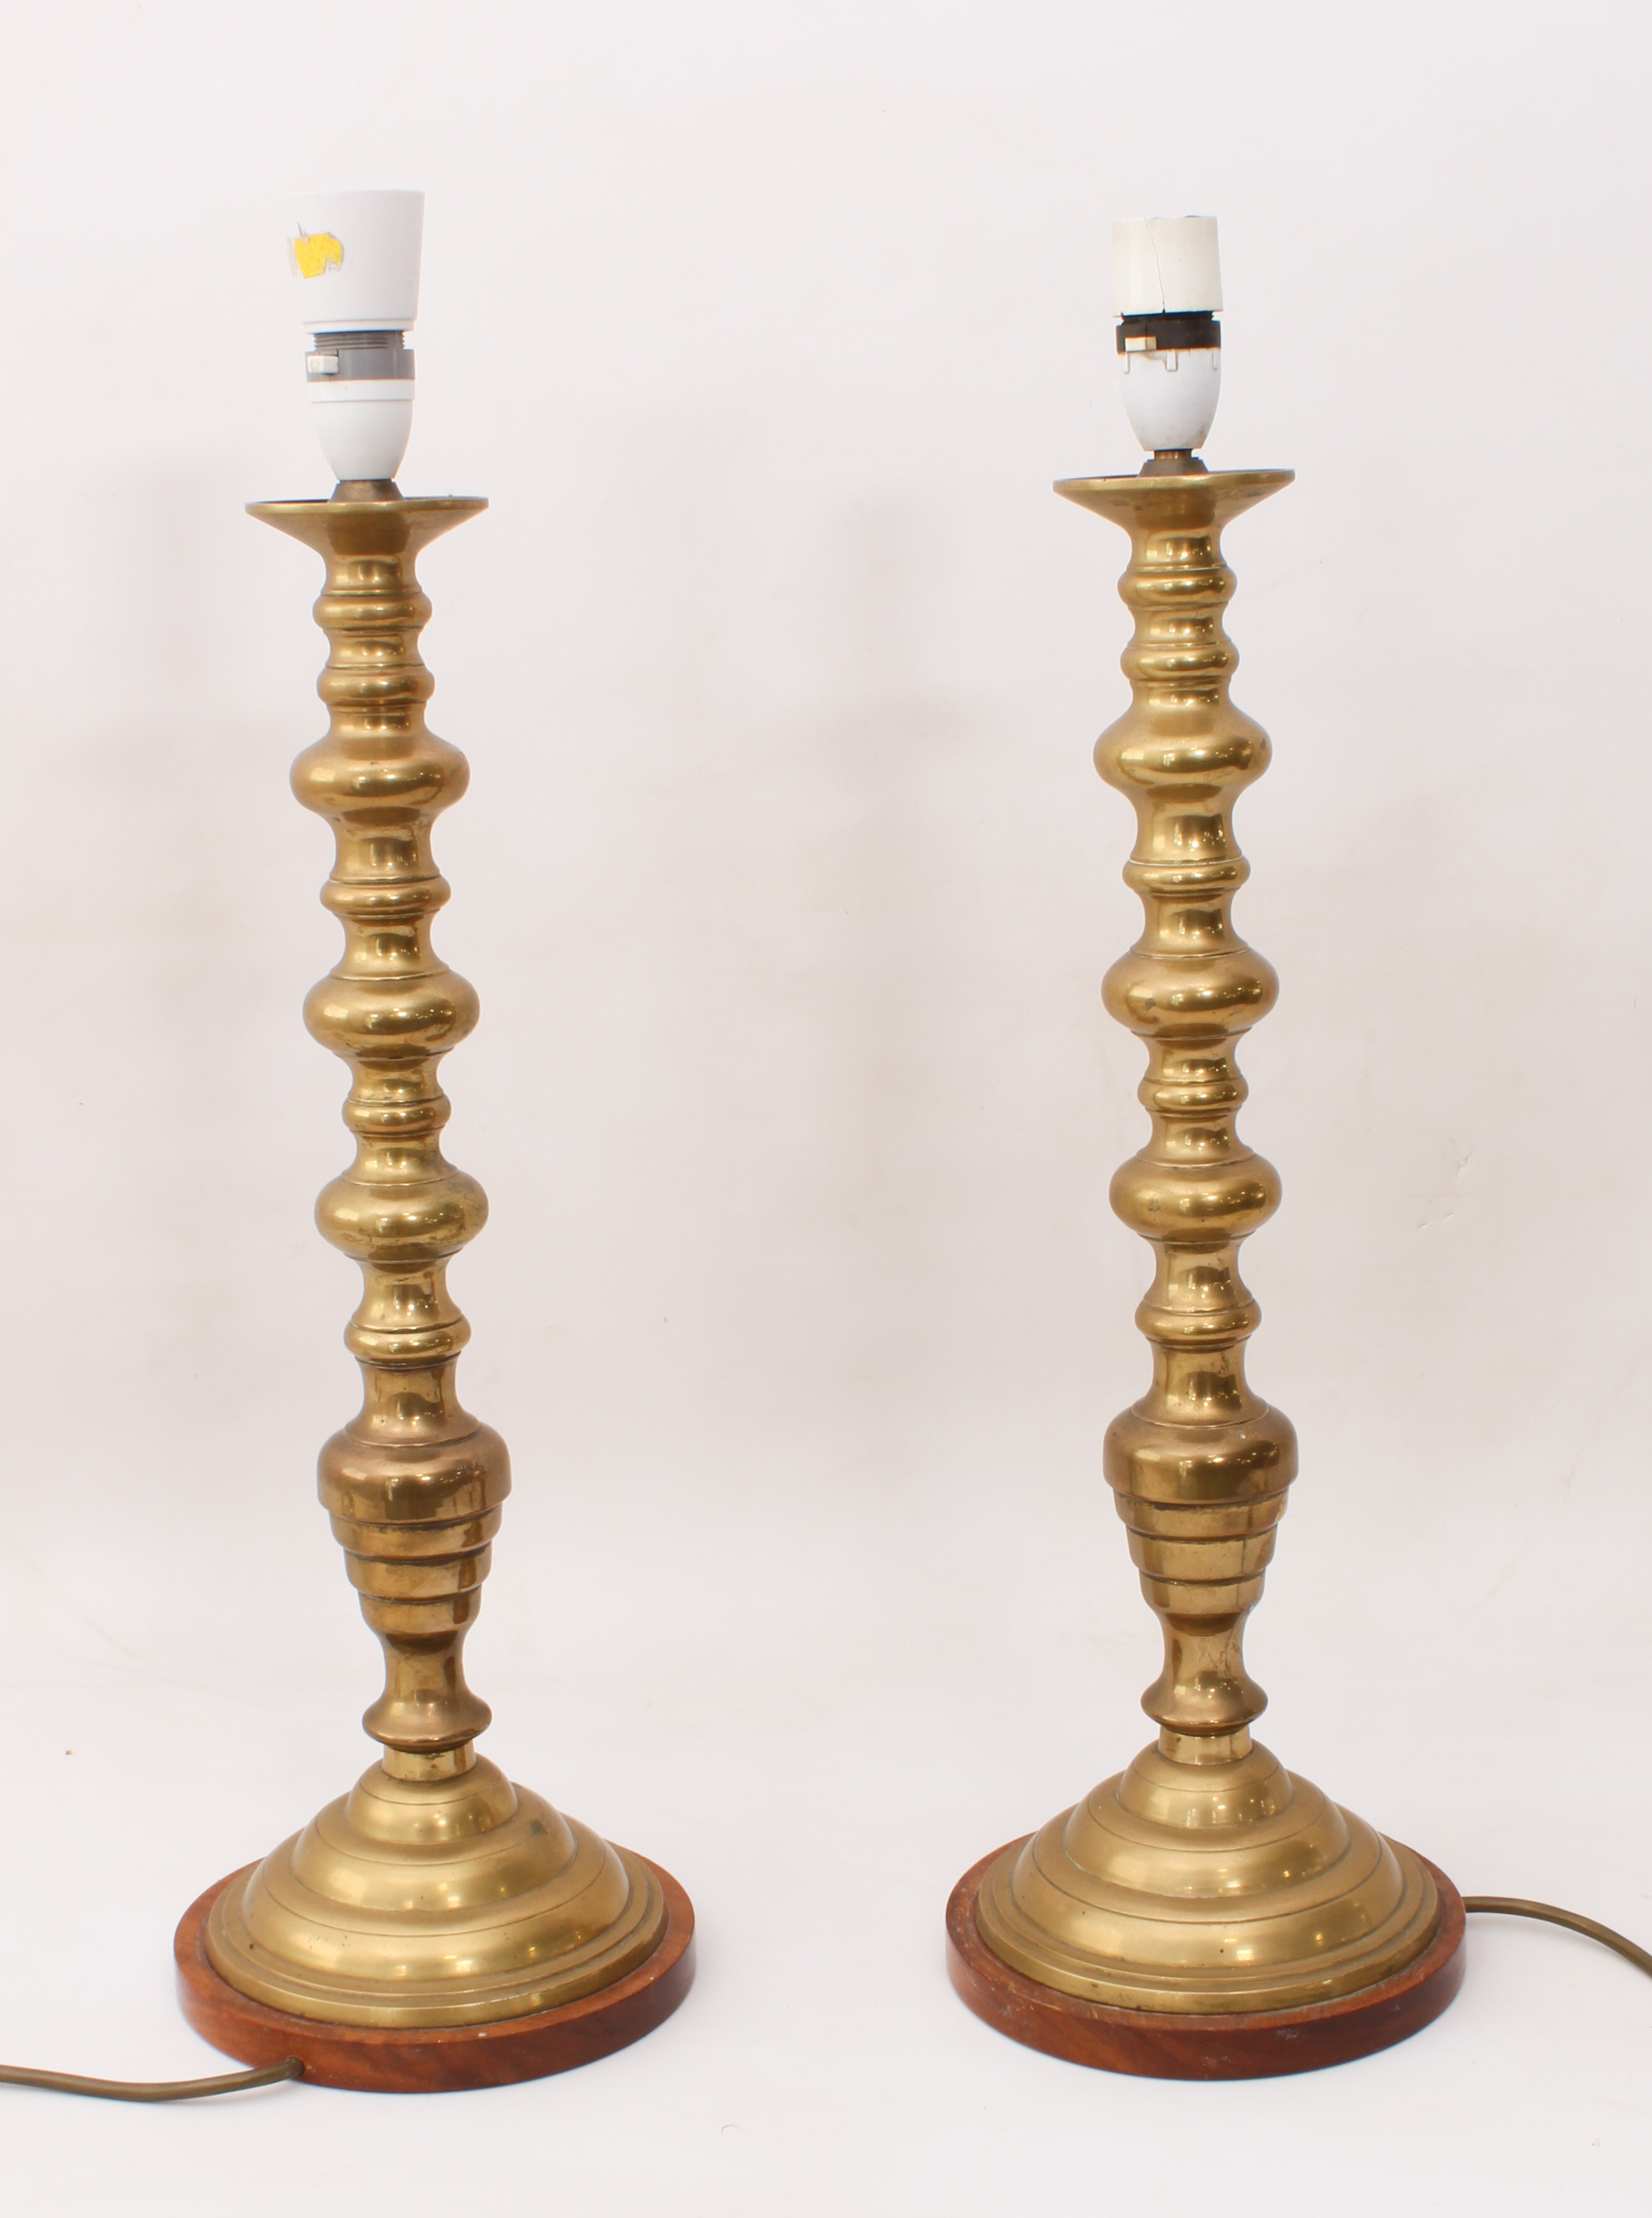 A pair of tall brass candlestick lamps in 19th century style - with knopped stems and stepped,